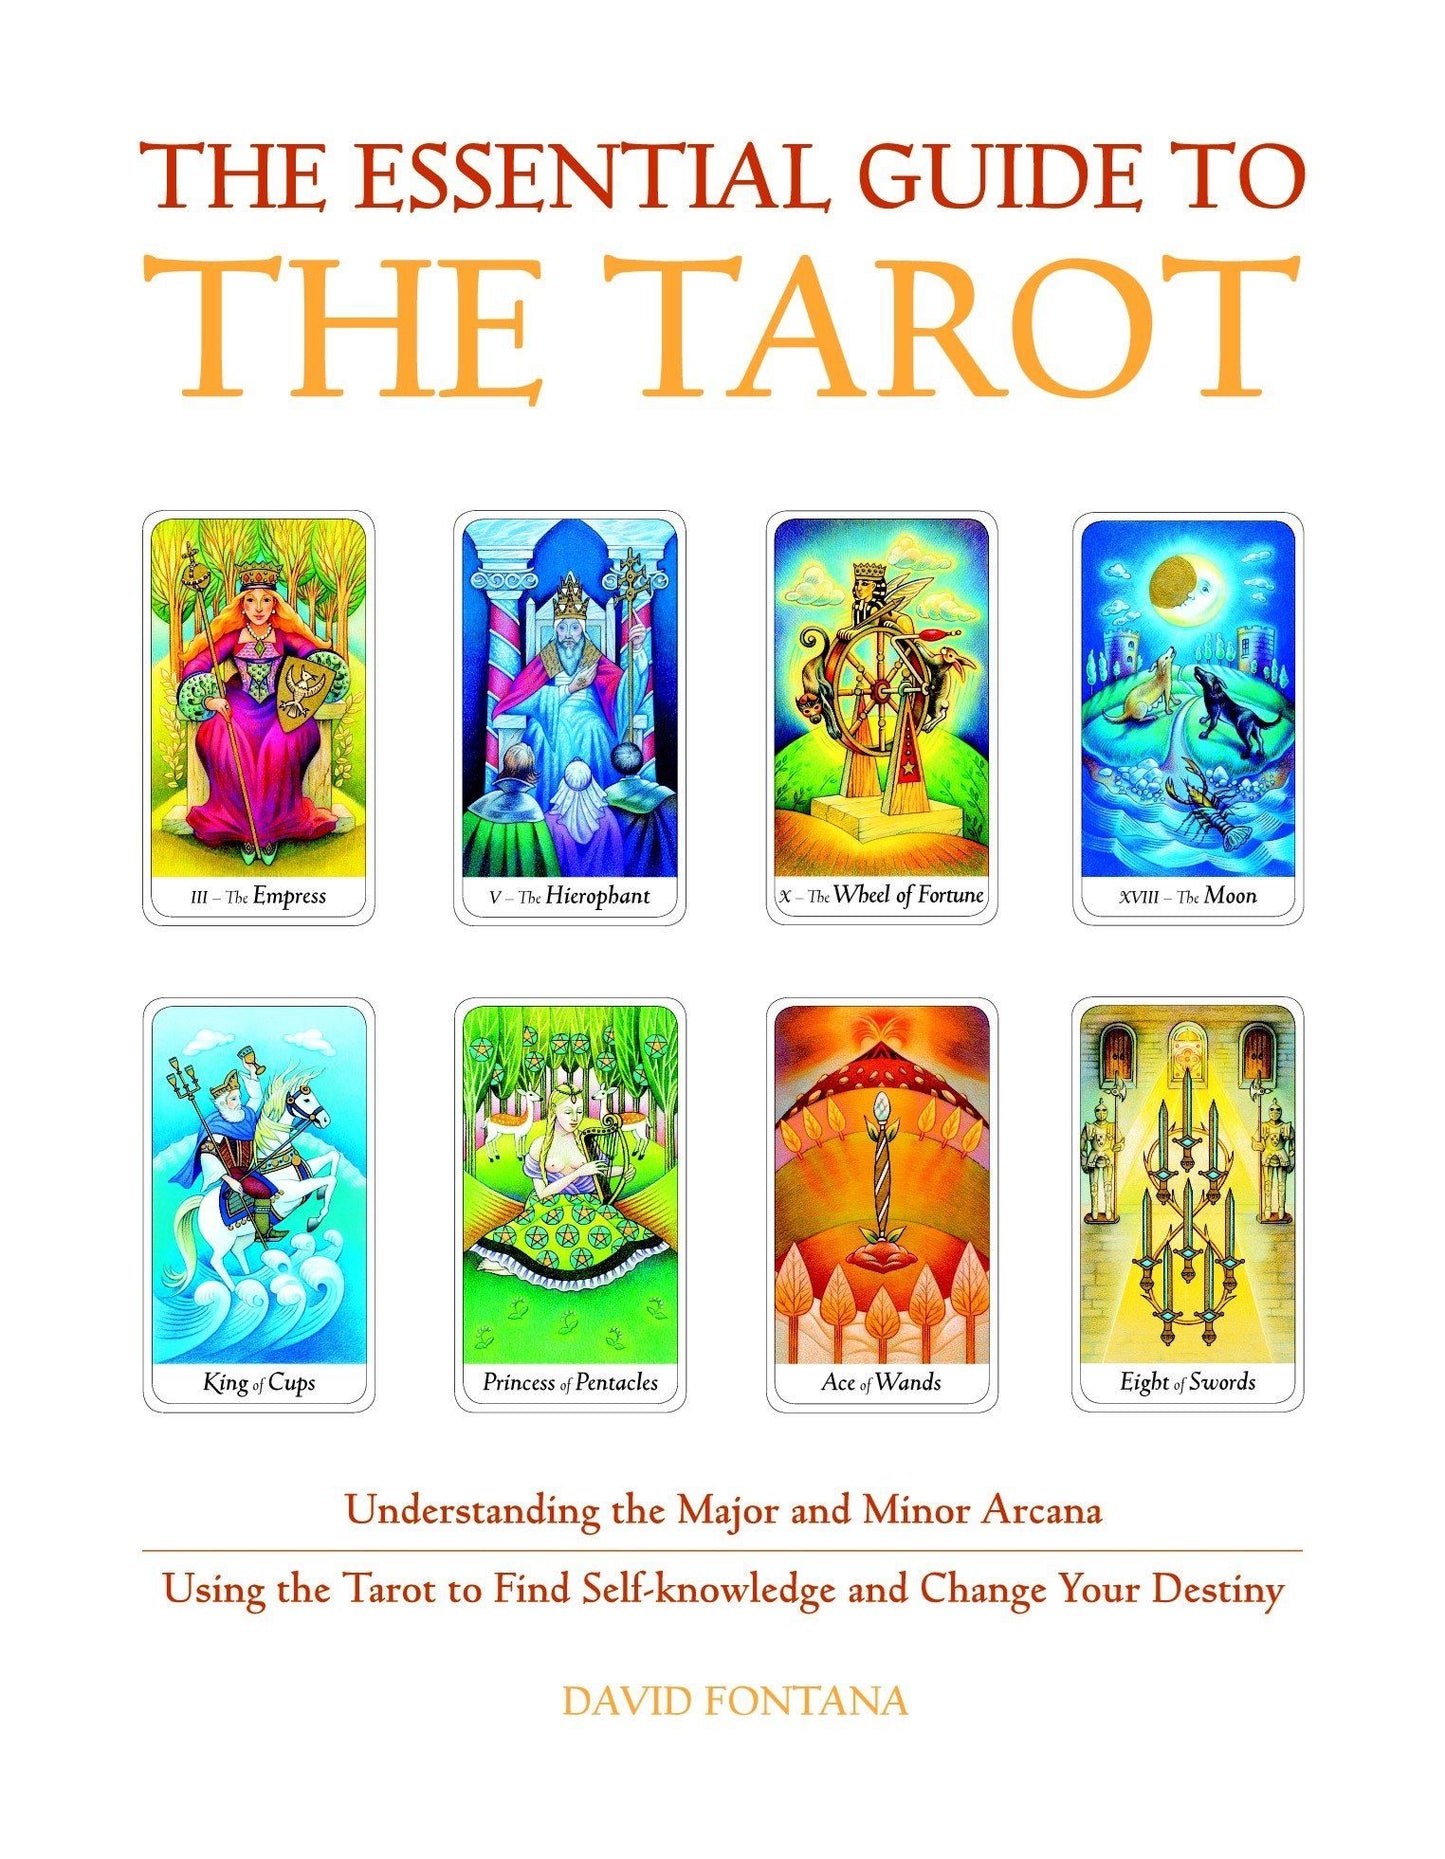 The Essential Guide to the Tarot